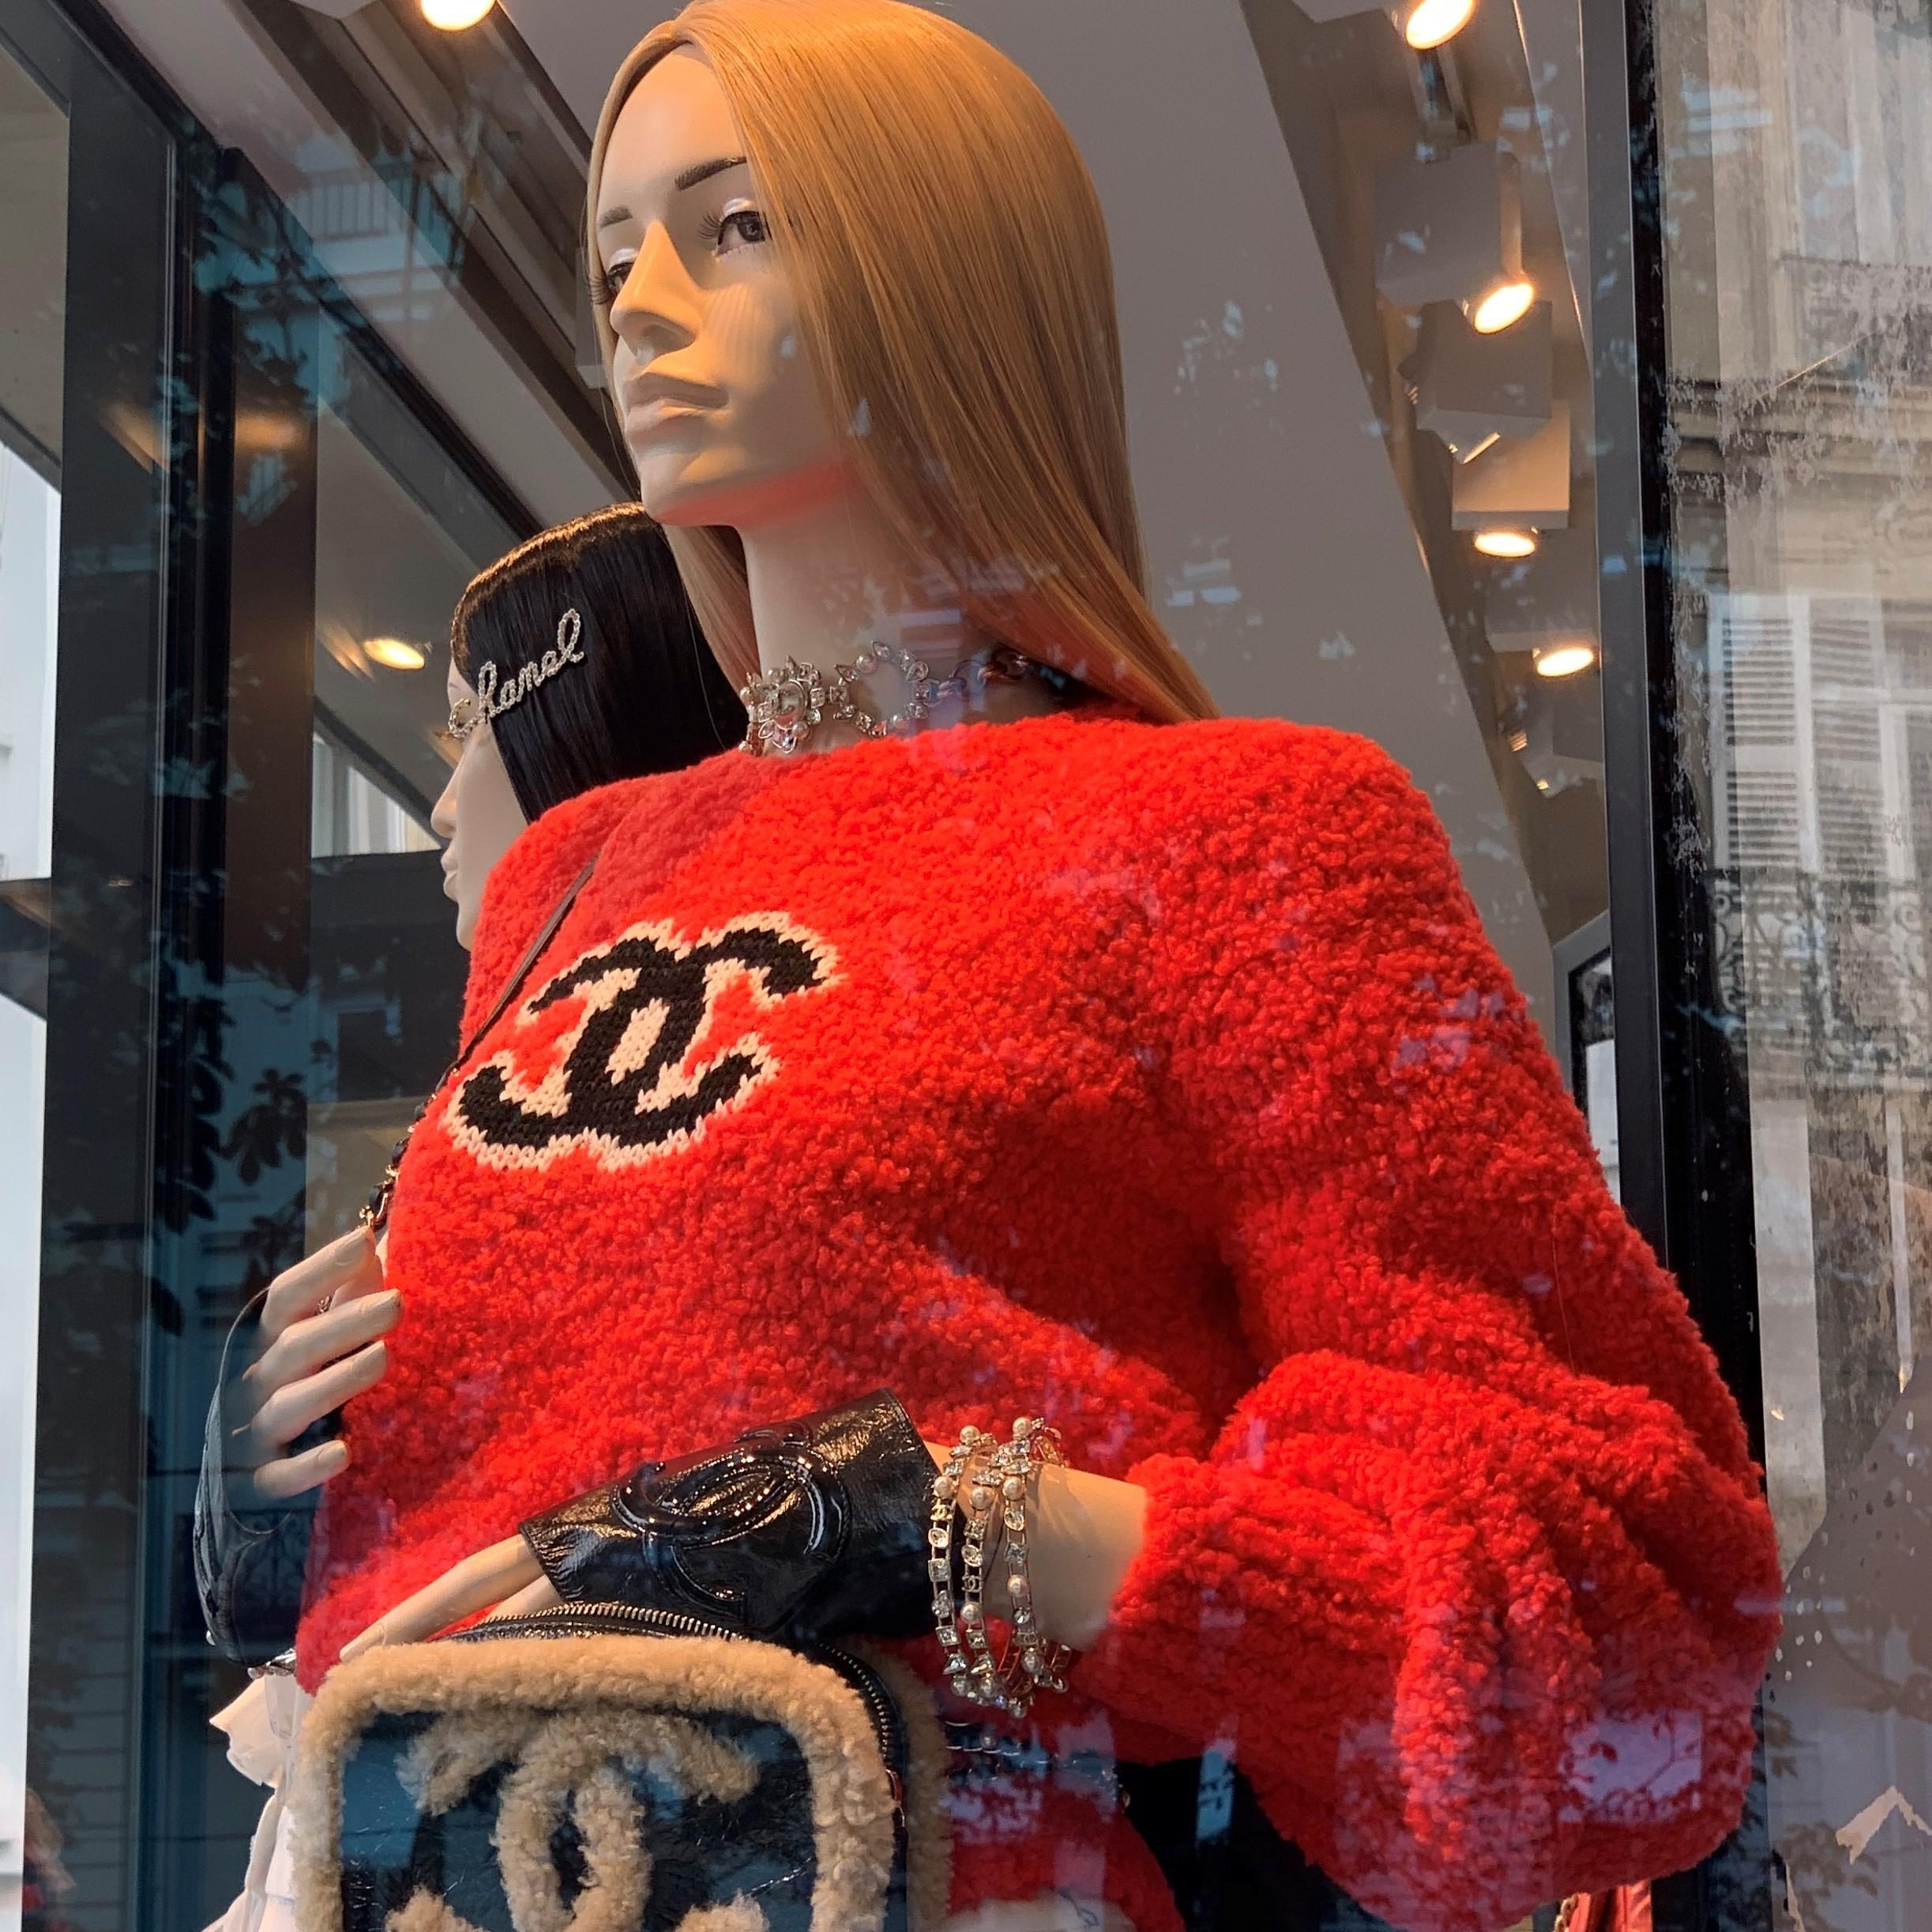 100% authentic guaranteed Chanel teddy sweater in red tone 
Due to flashlight color tone might vary in person.
New with tags.Receipt available to purchaser upon request
Size 40FR.Please familiarize yourself with Chanel sizing before purchase 

FINAL